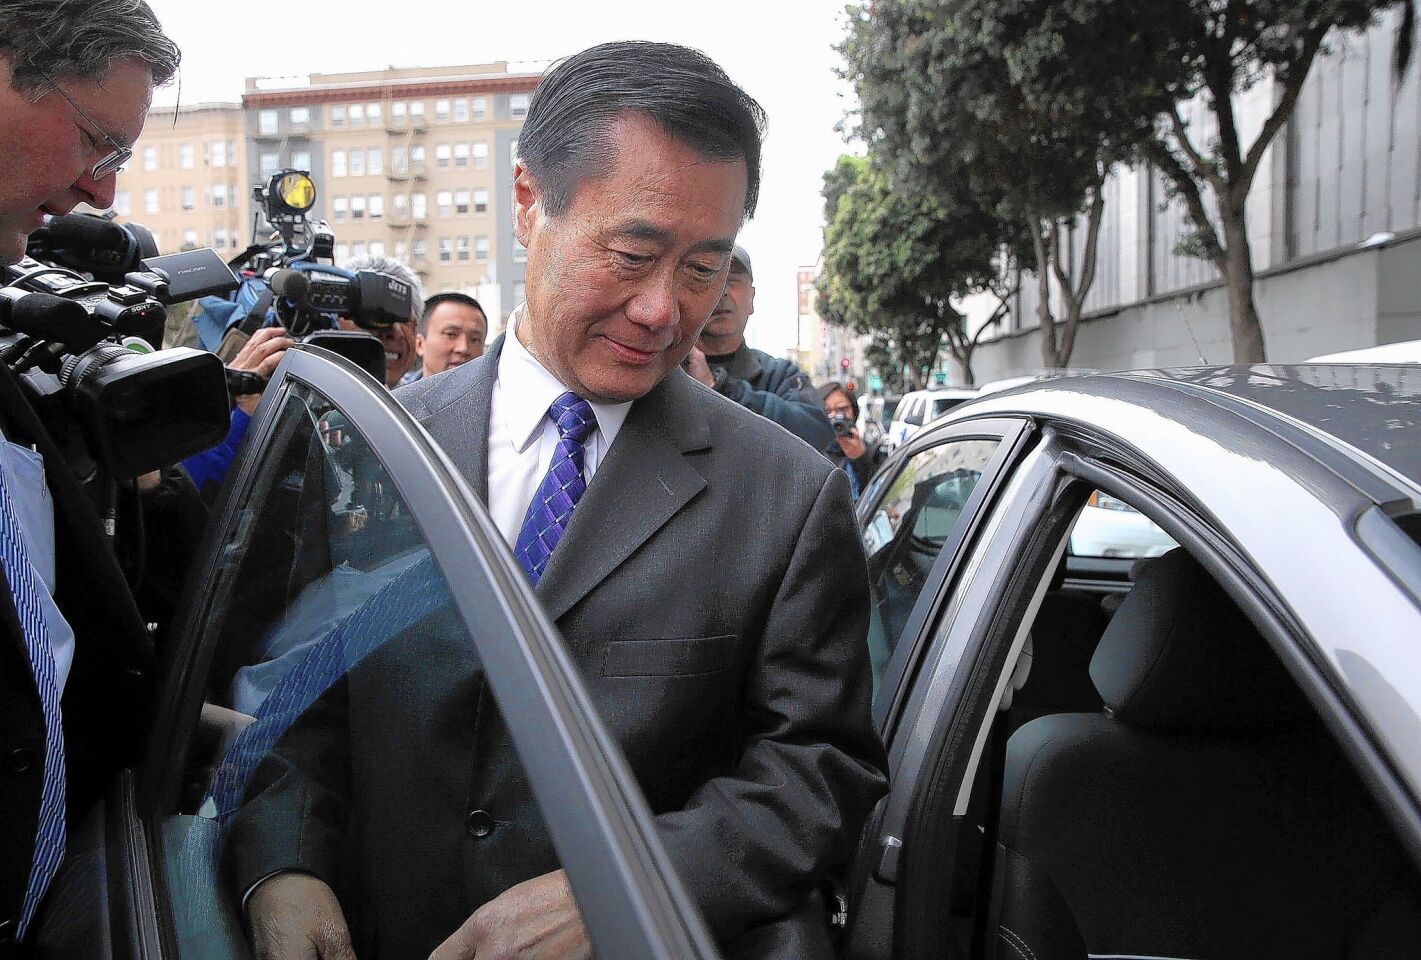 State Sen. Leland Yee leaves the Federal Building in March after a court appearance. Yee was arrested by FBI agents on charges of corruption and conspiring to illegally traffic firearms.